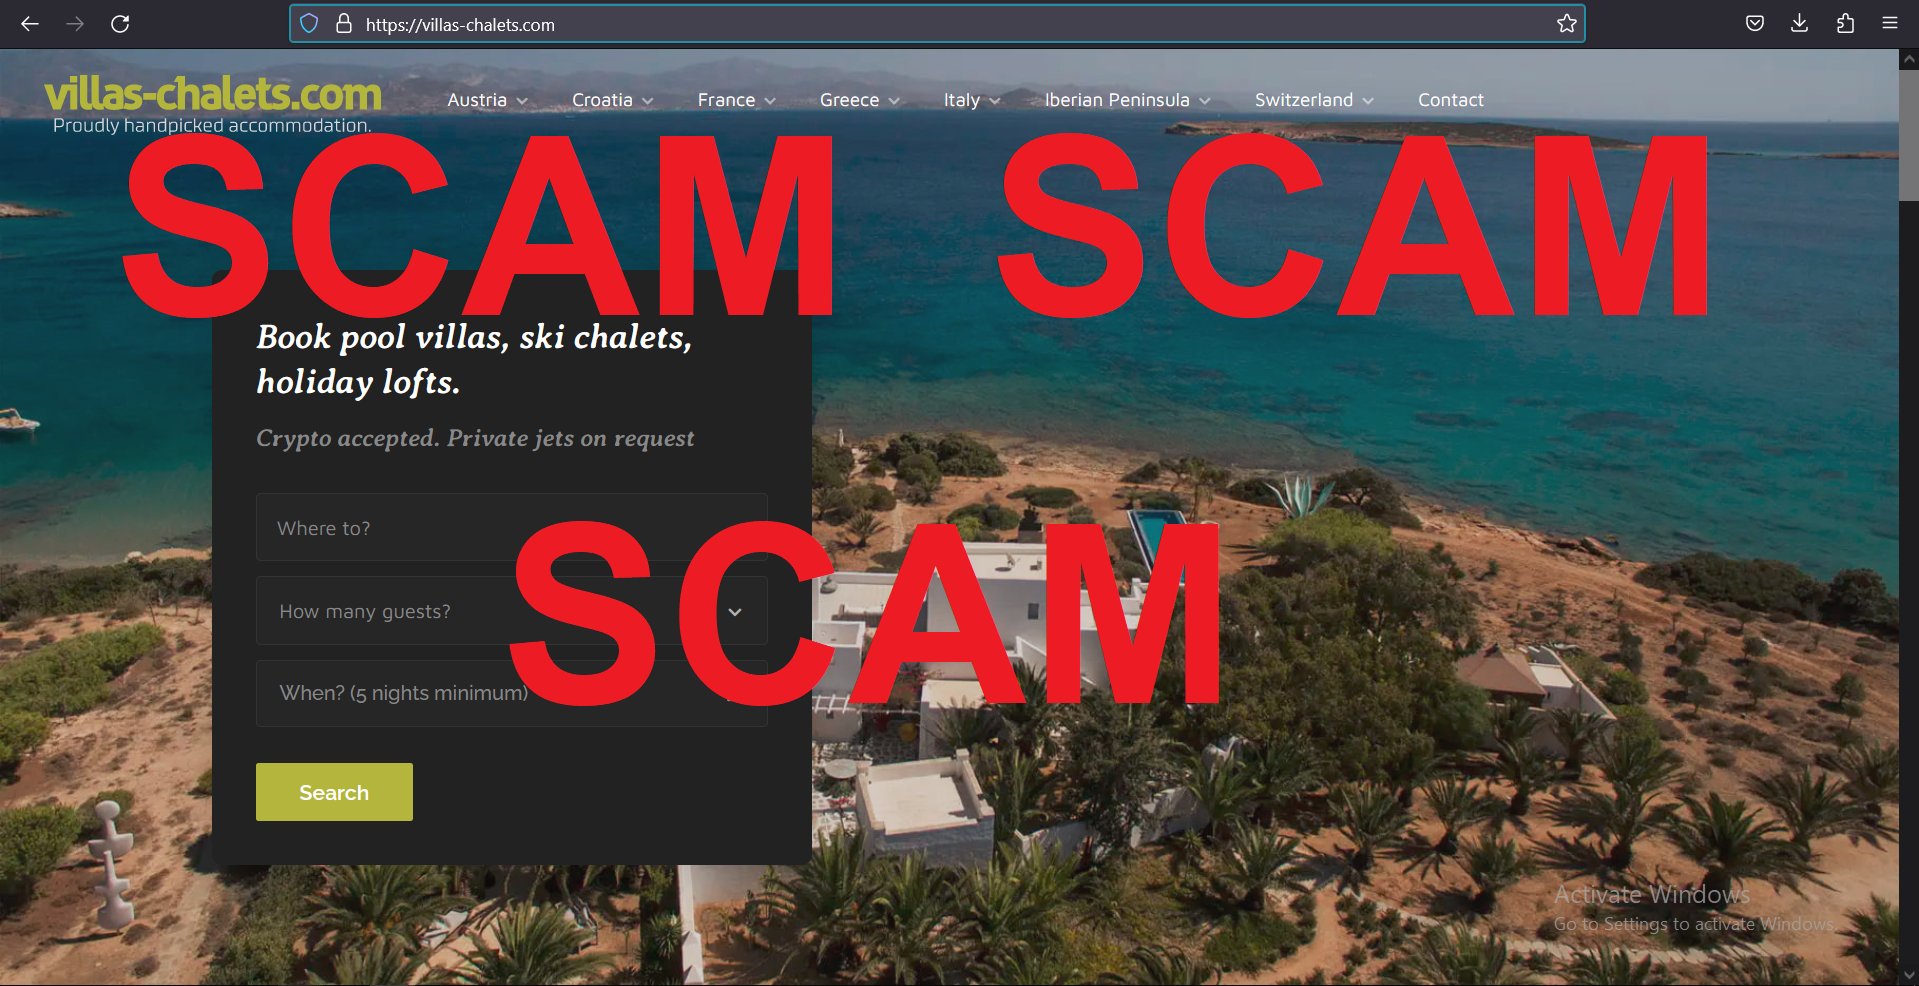 You are currently viewing Fraudulent website: villas-chalets.com SCAM SCAM SCAM